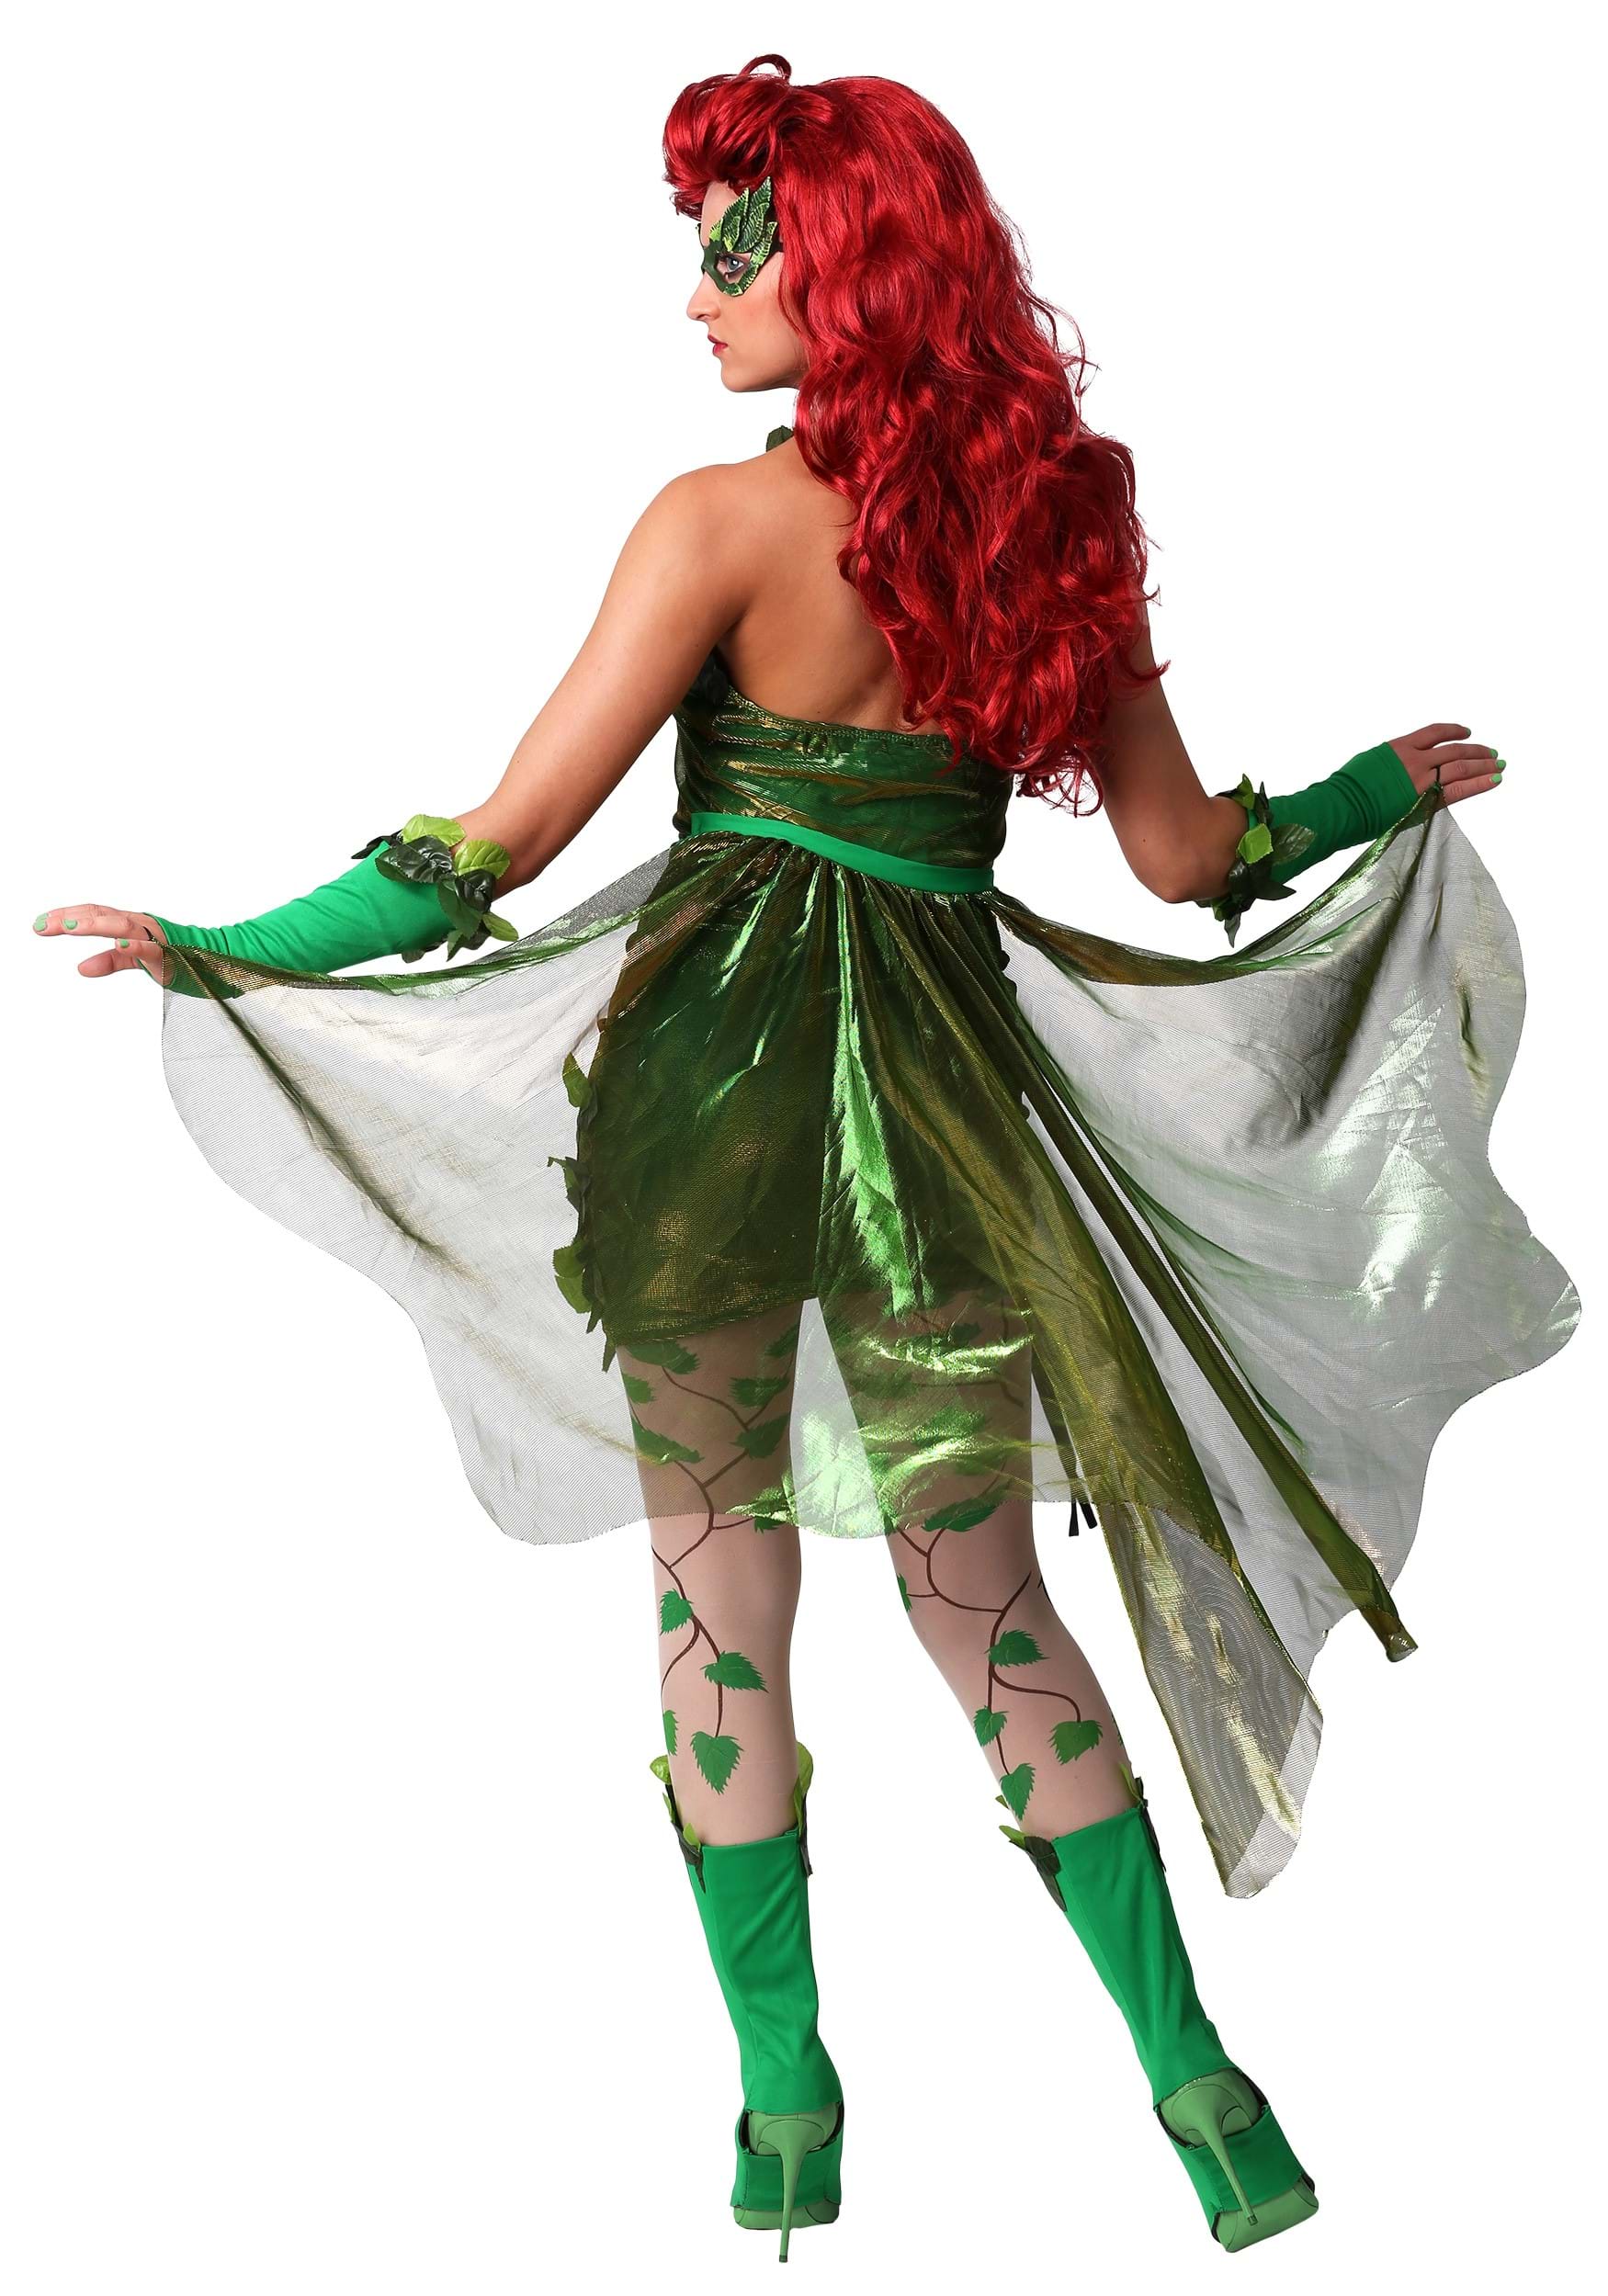 Lethal Beauty Plus Size Fancy Dress Costume For Women , Mother Nature Halloween Fancy Dress Costume